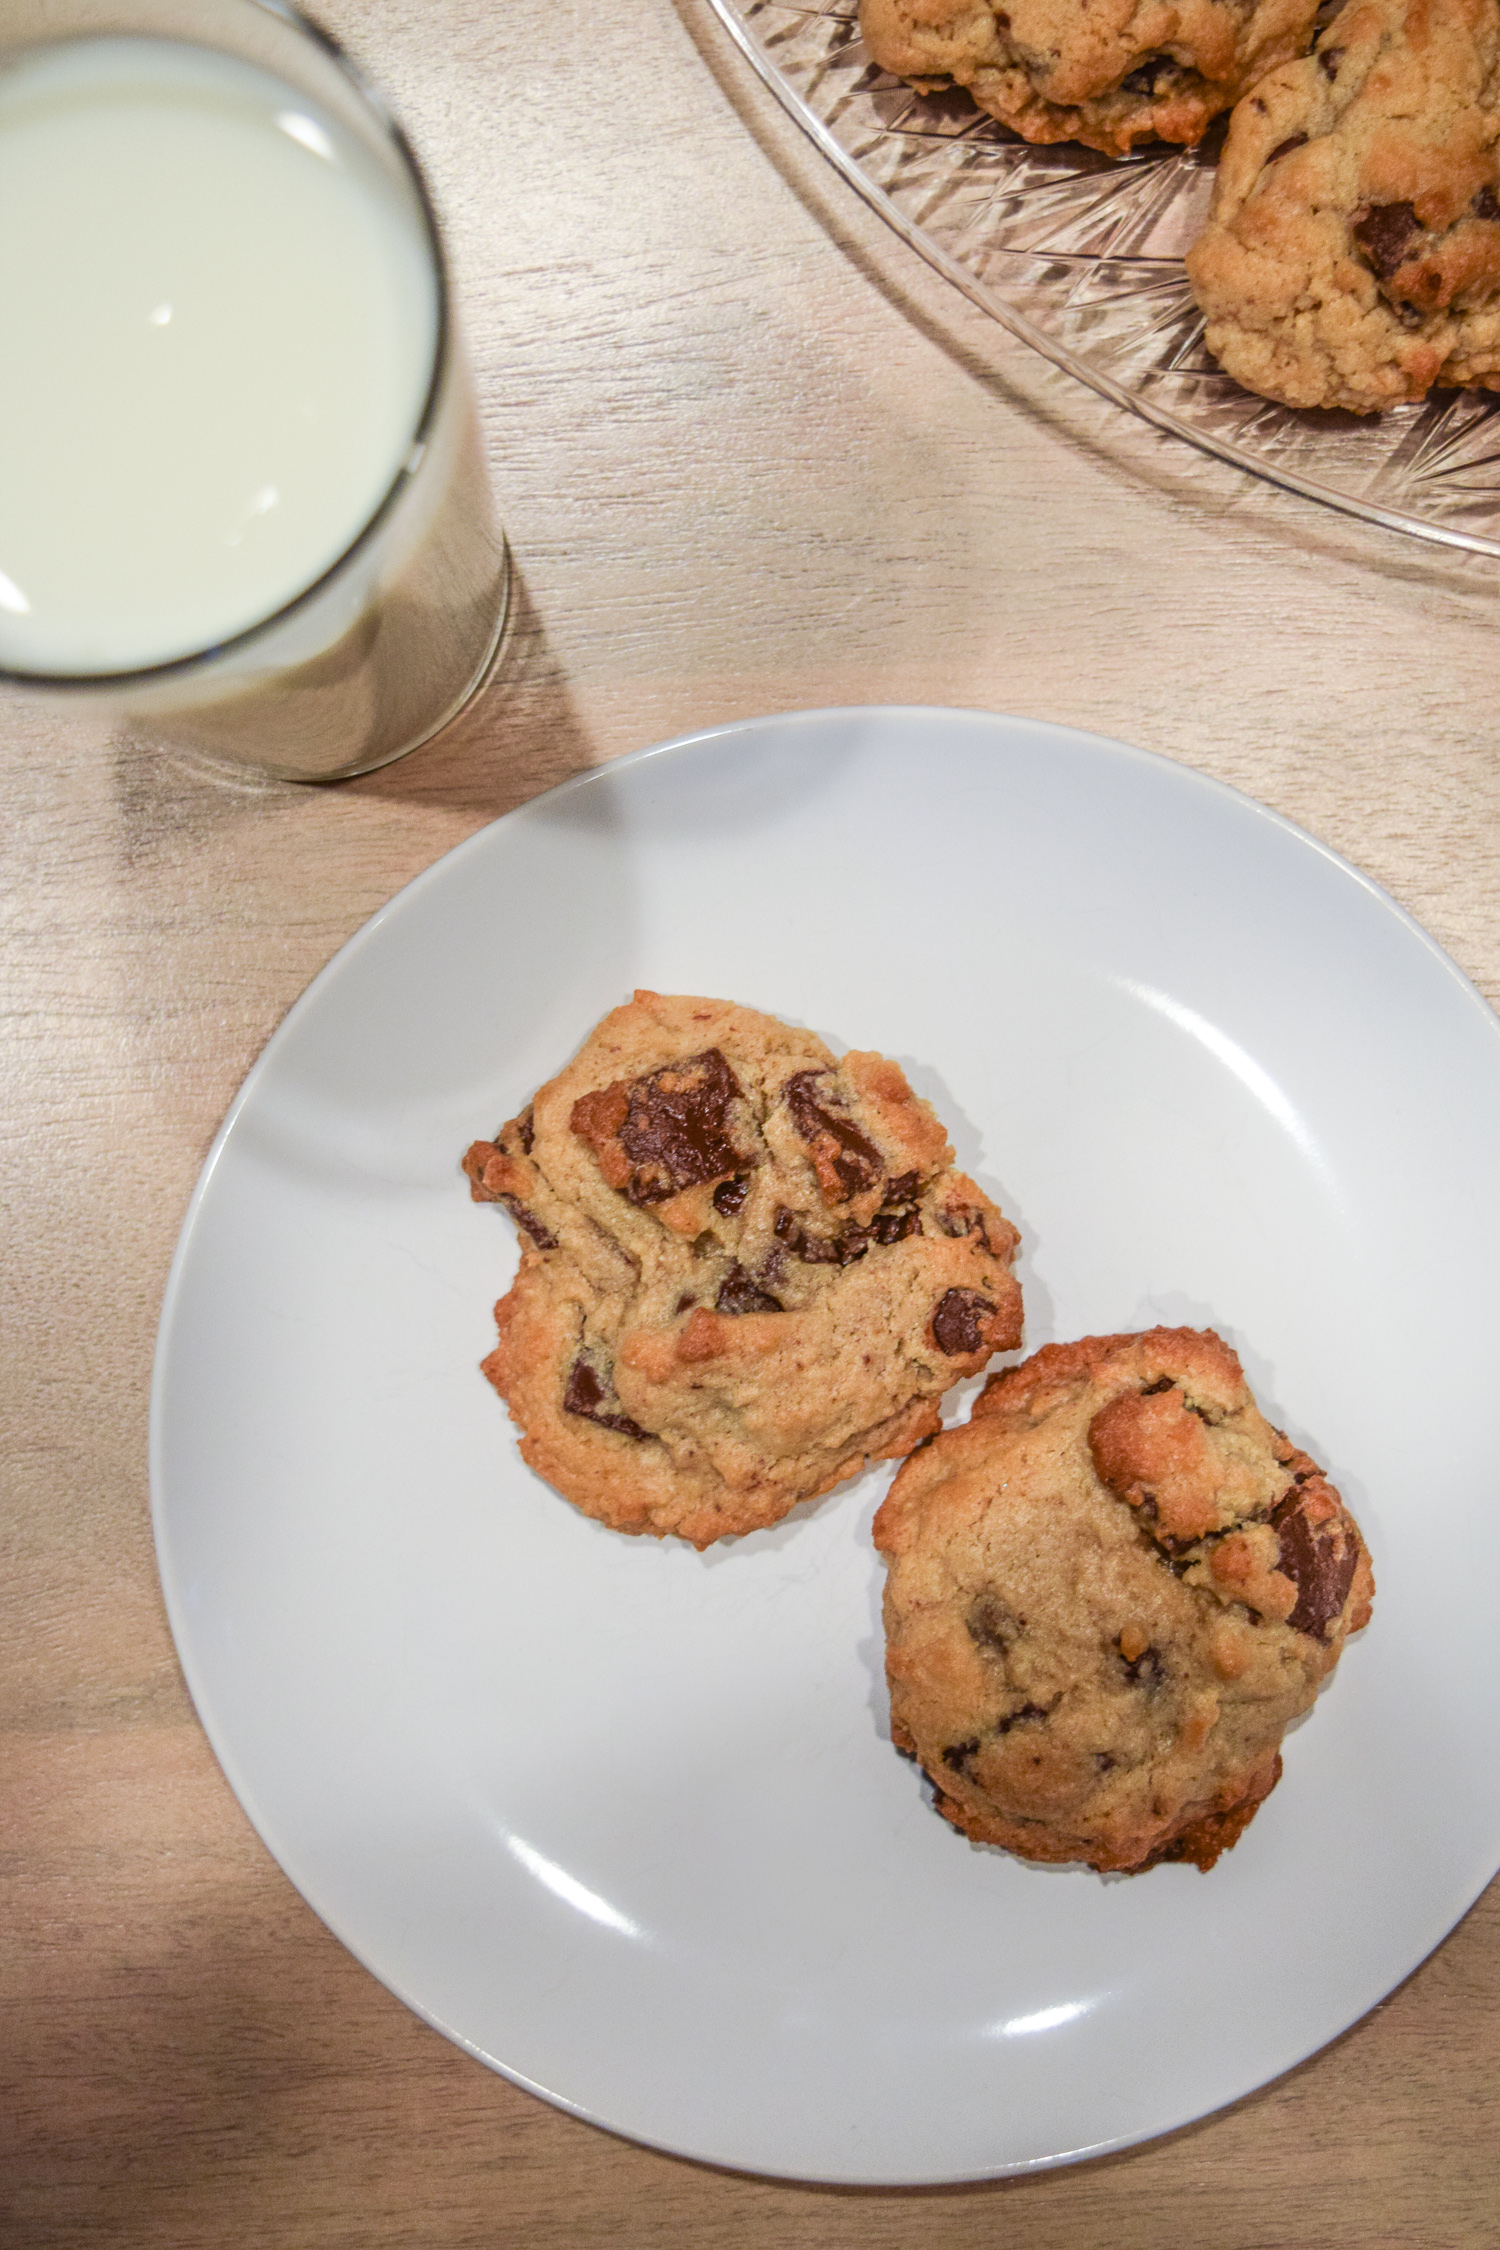 Specialty's Semi-Sweet Chocolate Chunk Cookies with glass of milk from above